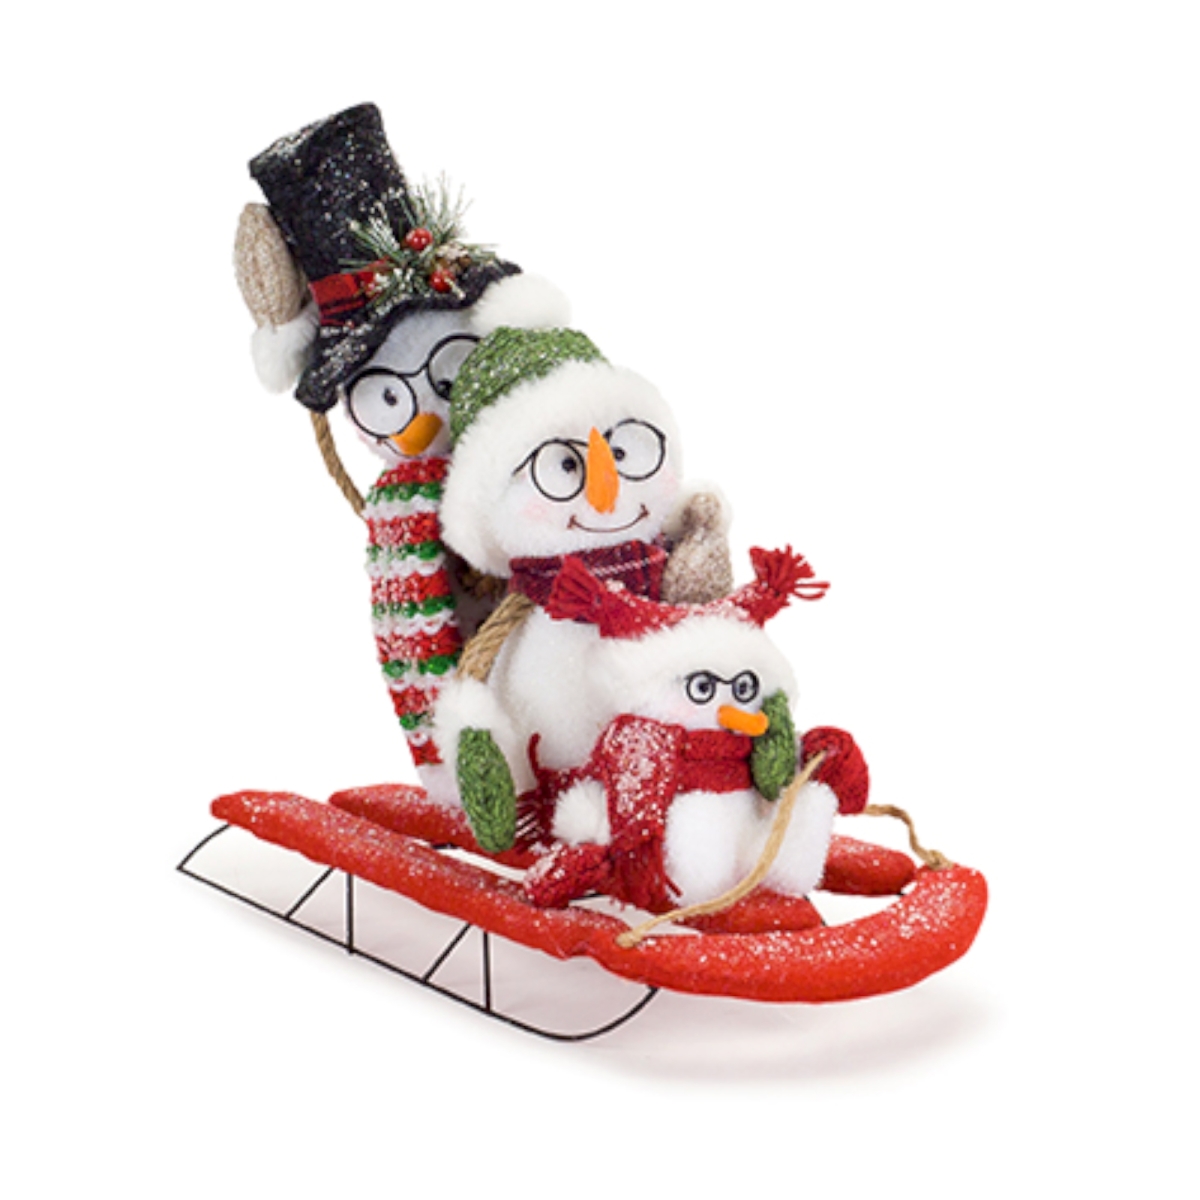 72400ds 14 X 6.75 In. Foam & Flocking Snowman Family On Sled Toy, White & Red